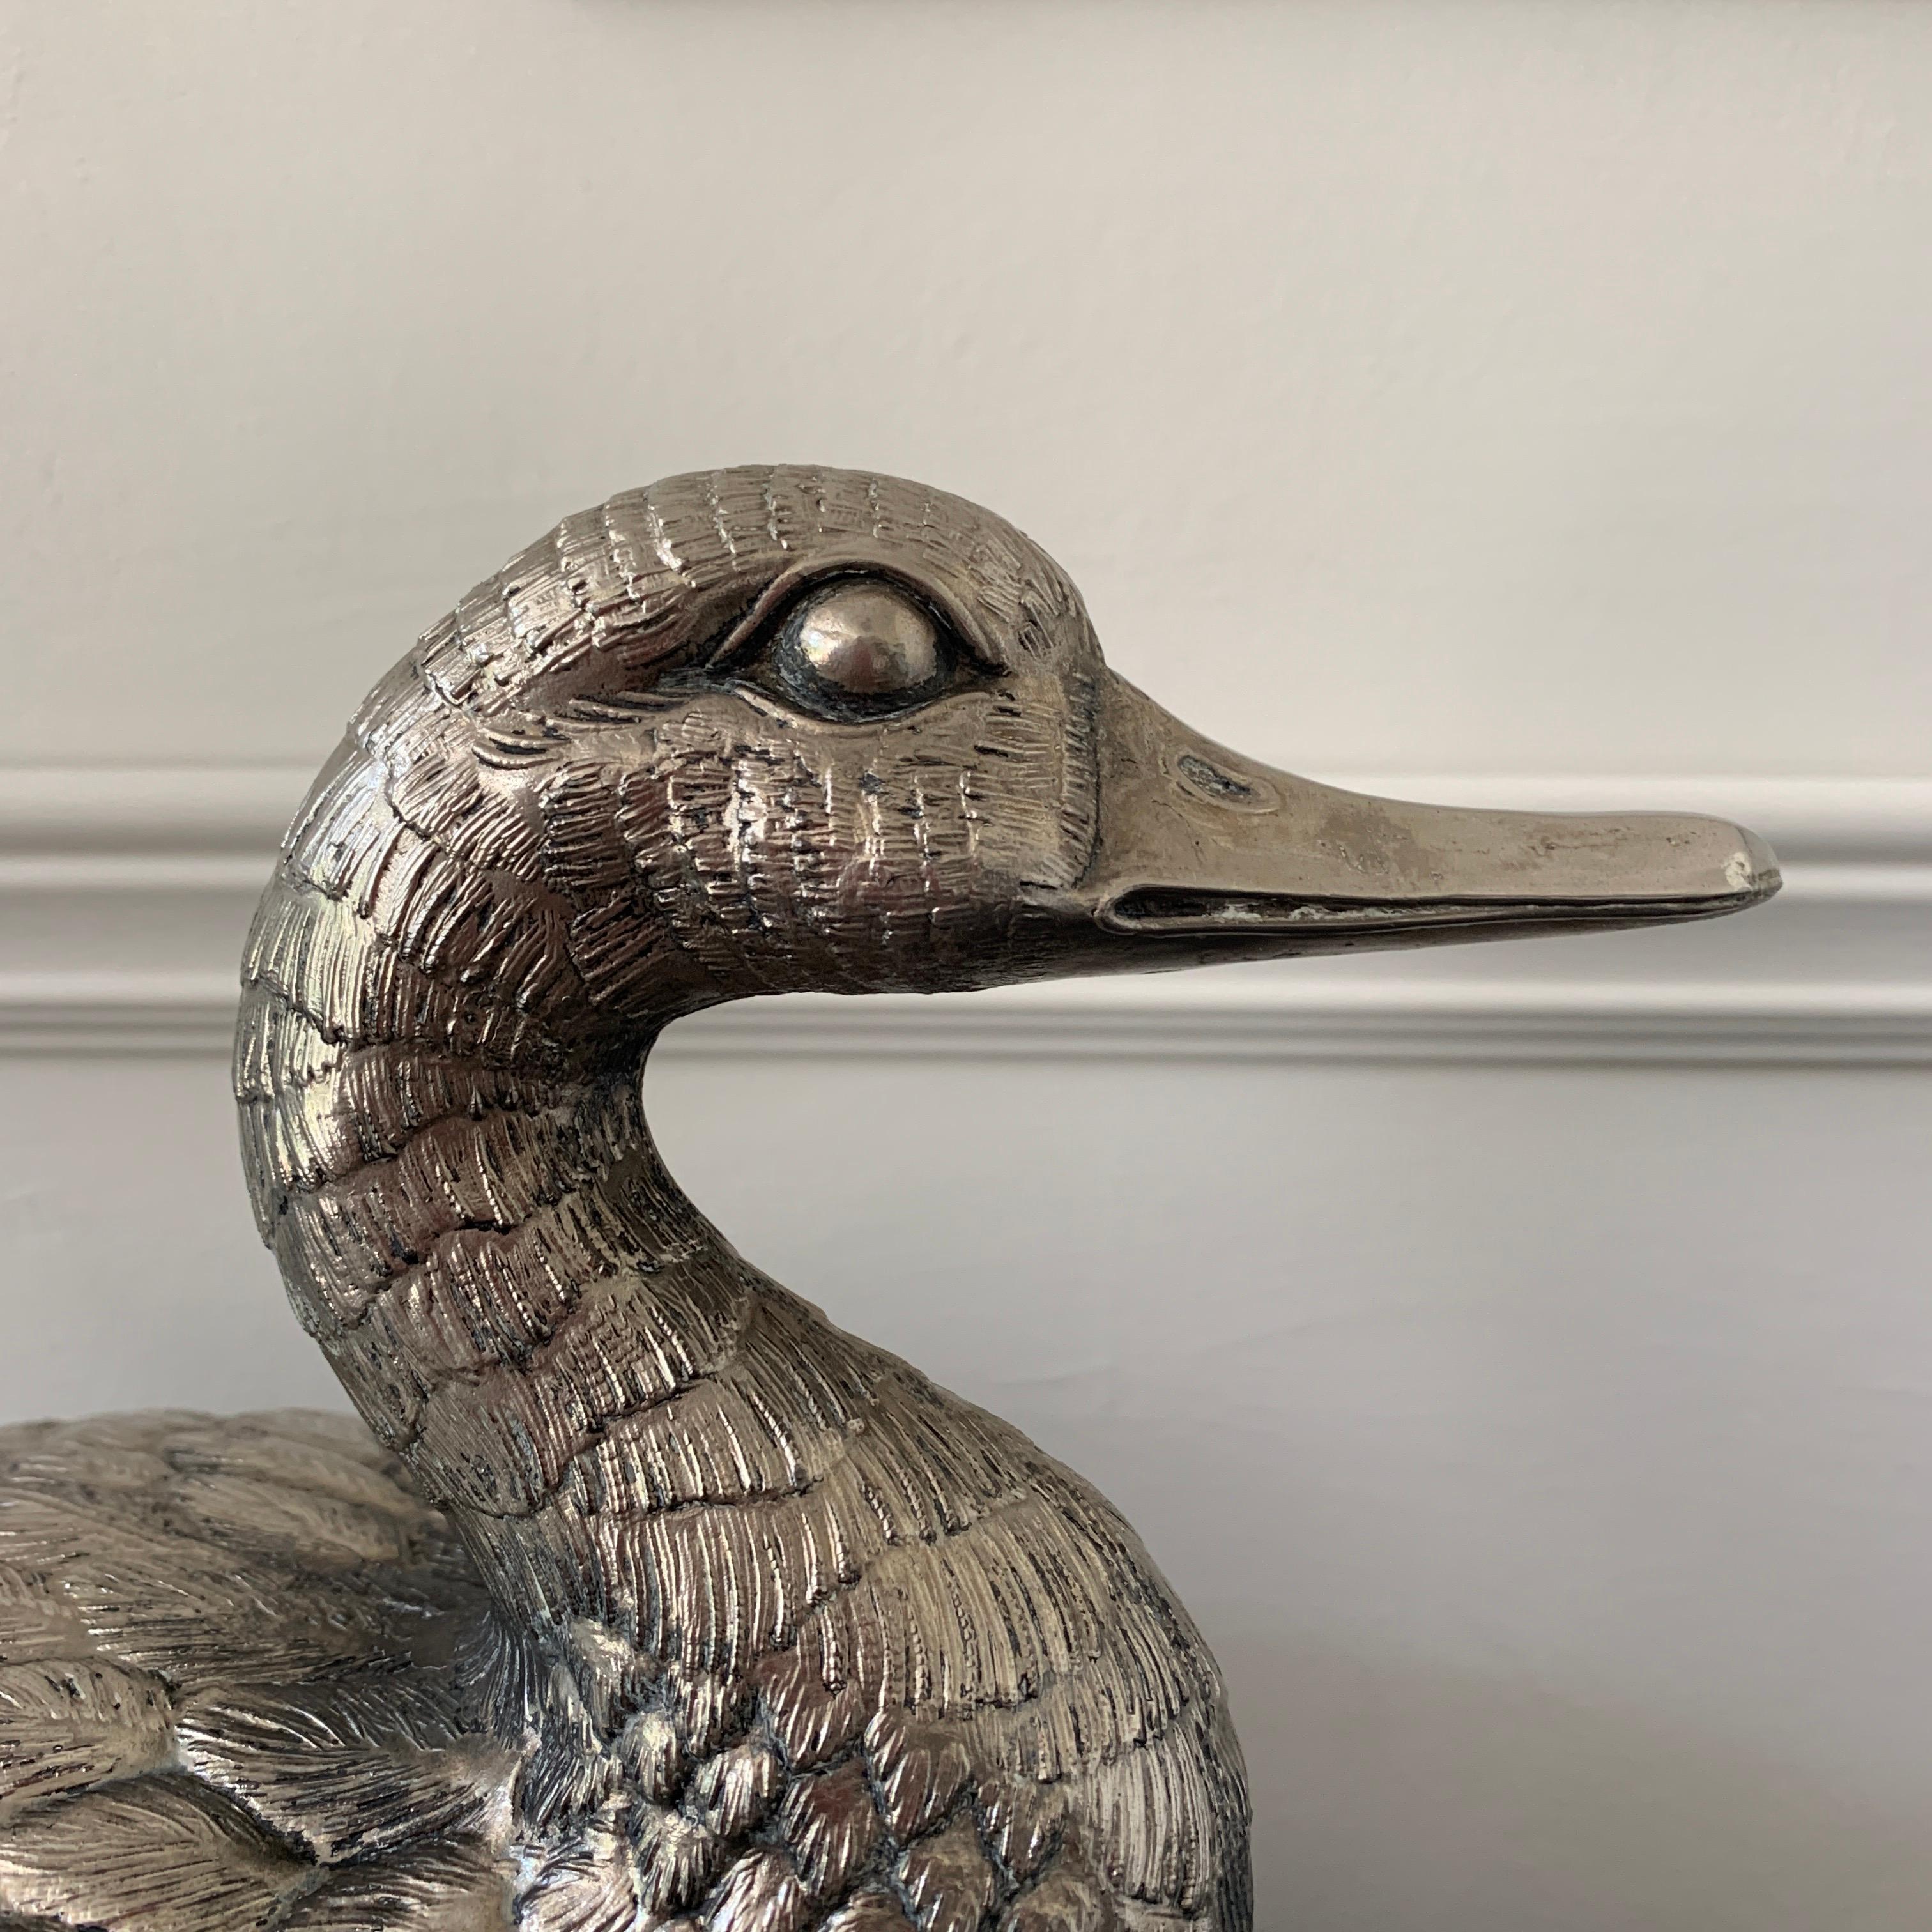 Fabulous duck ice bucket by Mauro Manetti, Italy
circa 1960s
Pewter
The duck still has a silver finish
Some minor loss to the wing tip but this is hard to notice unless advised, we have shown this in the photograph
There is no liner in the lid